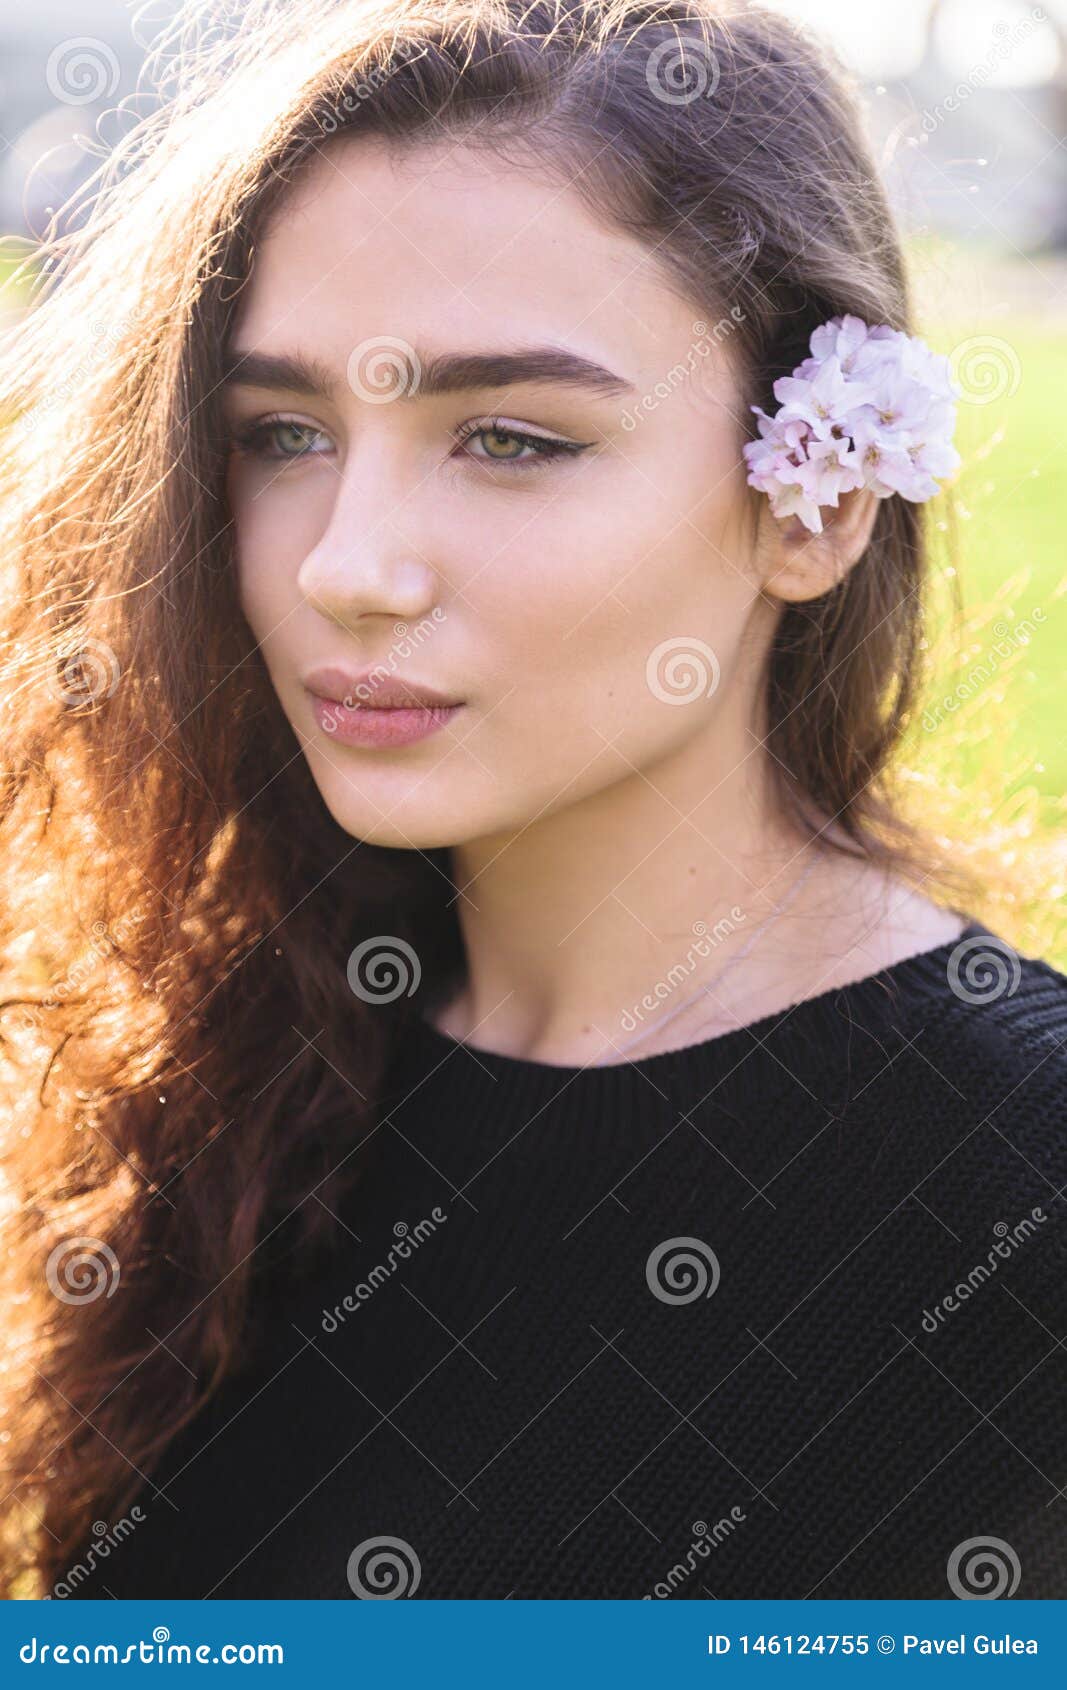 portrait of woman with pink flower behind her ear